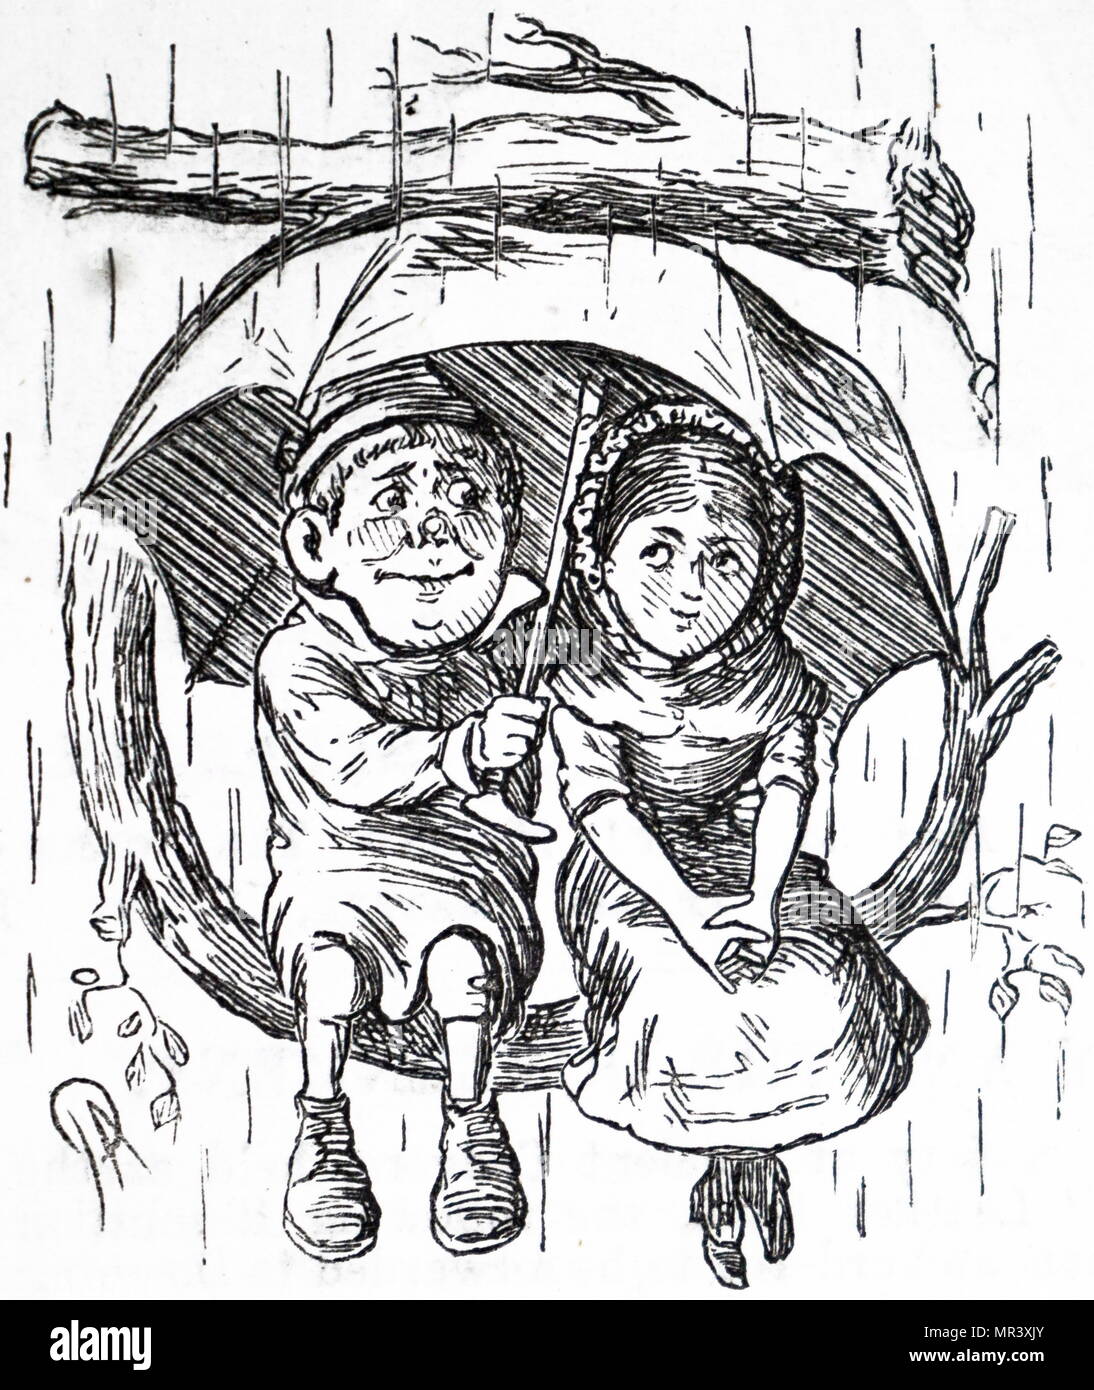 https://c8.alamy.com/comp/MR3XJY/cartoon-depicting-a-young-boy-and-girl-sitting-under-his-umbrella-sheltering-themselves-from-the-rain-dated-19th-century-MR3XJY.jpg